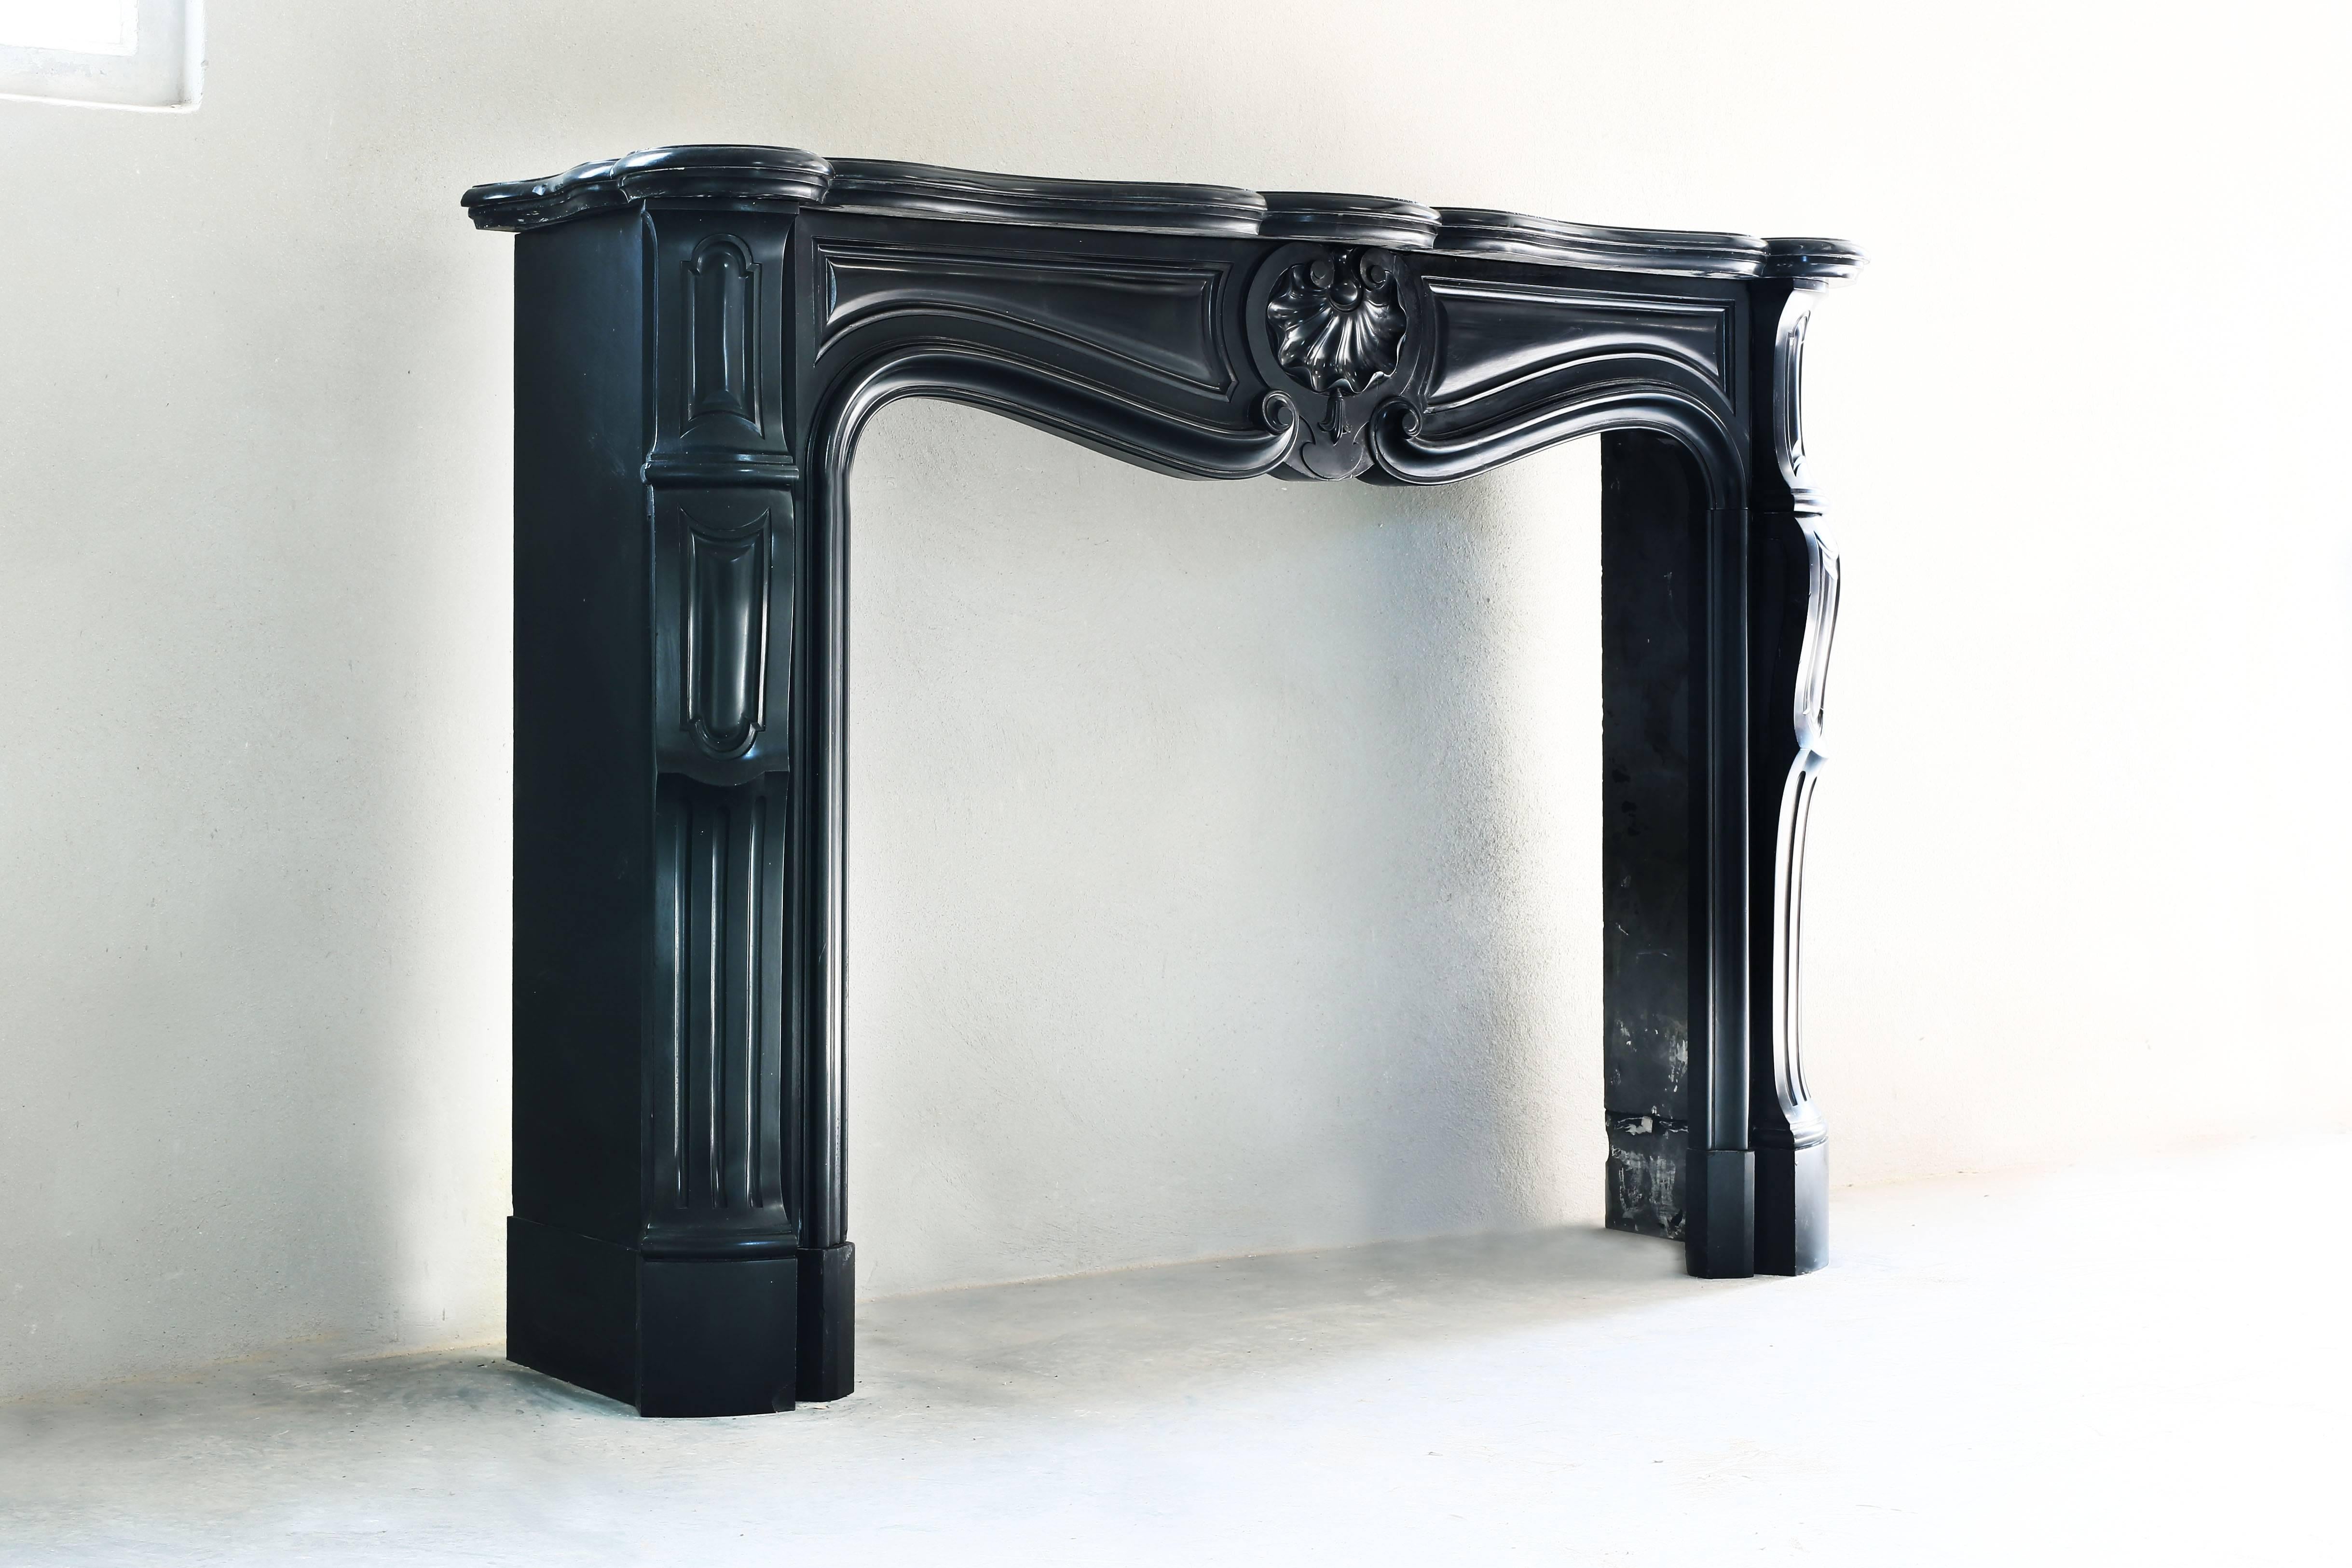 Antique Noir de Mazy fireplace from Belgium. Very nice of the ornaments, black color and graceful form.